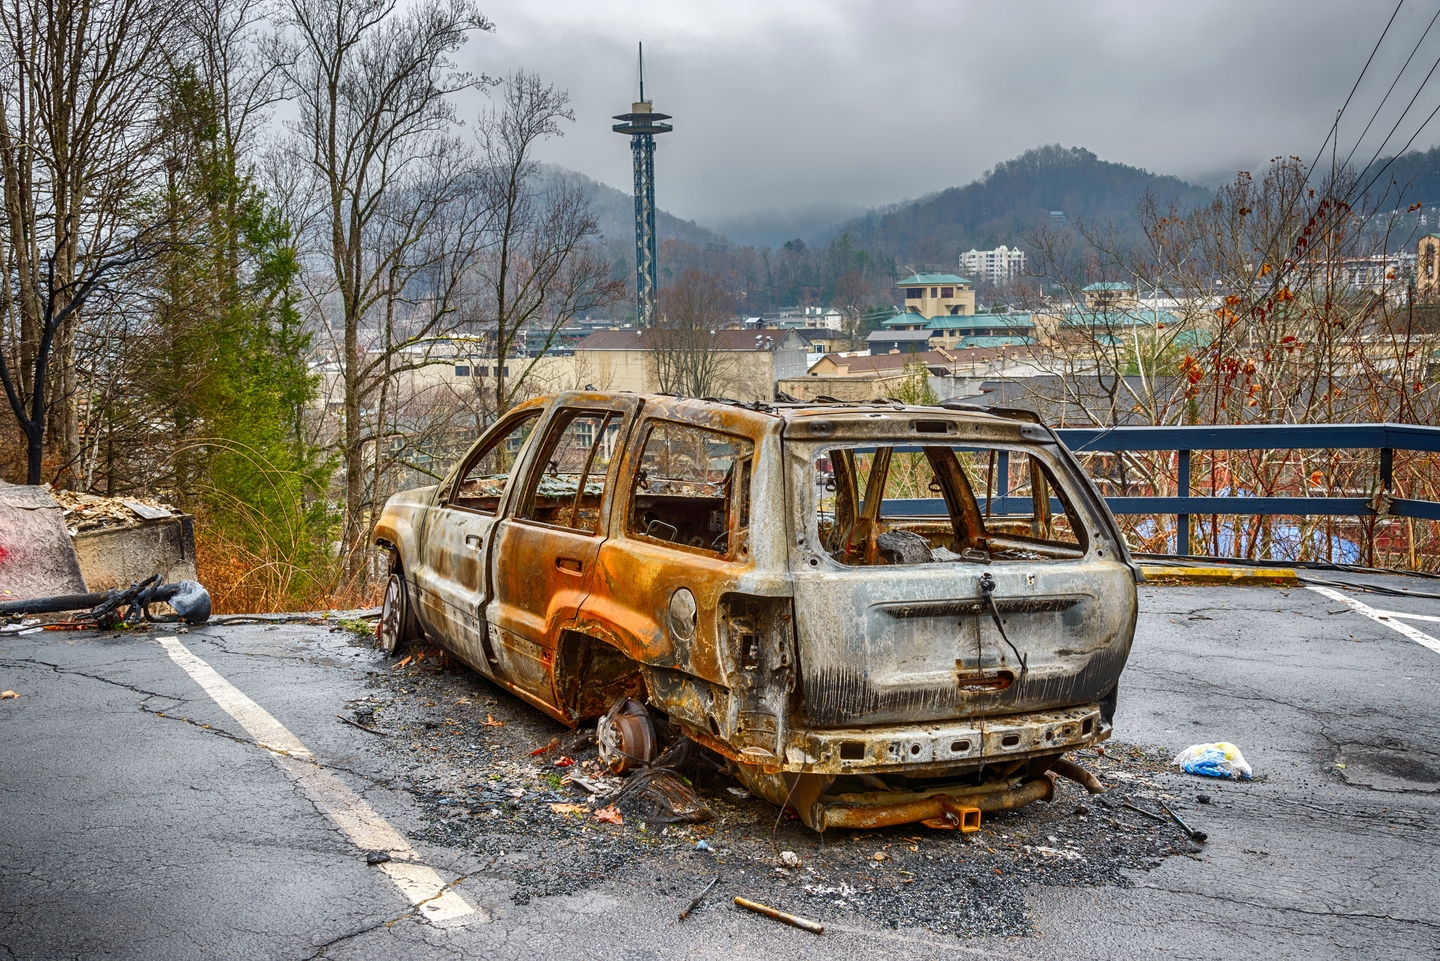 Aftermath of car being burned completely in Tennessee